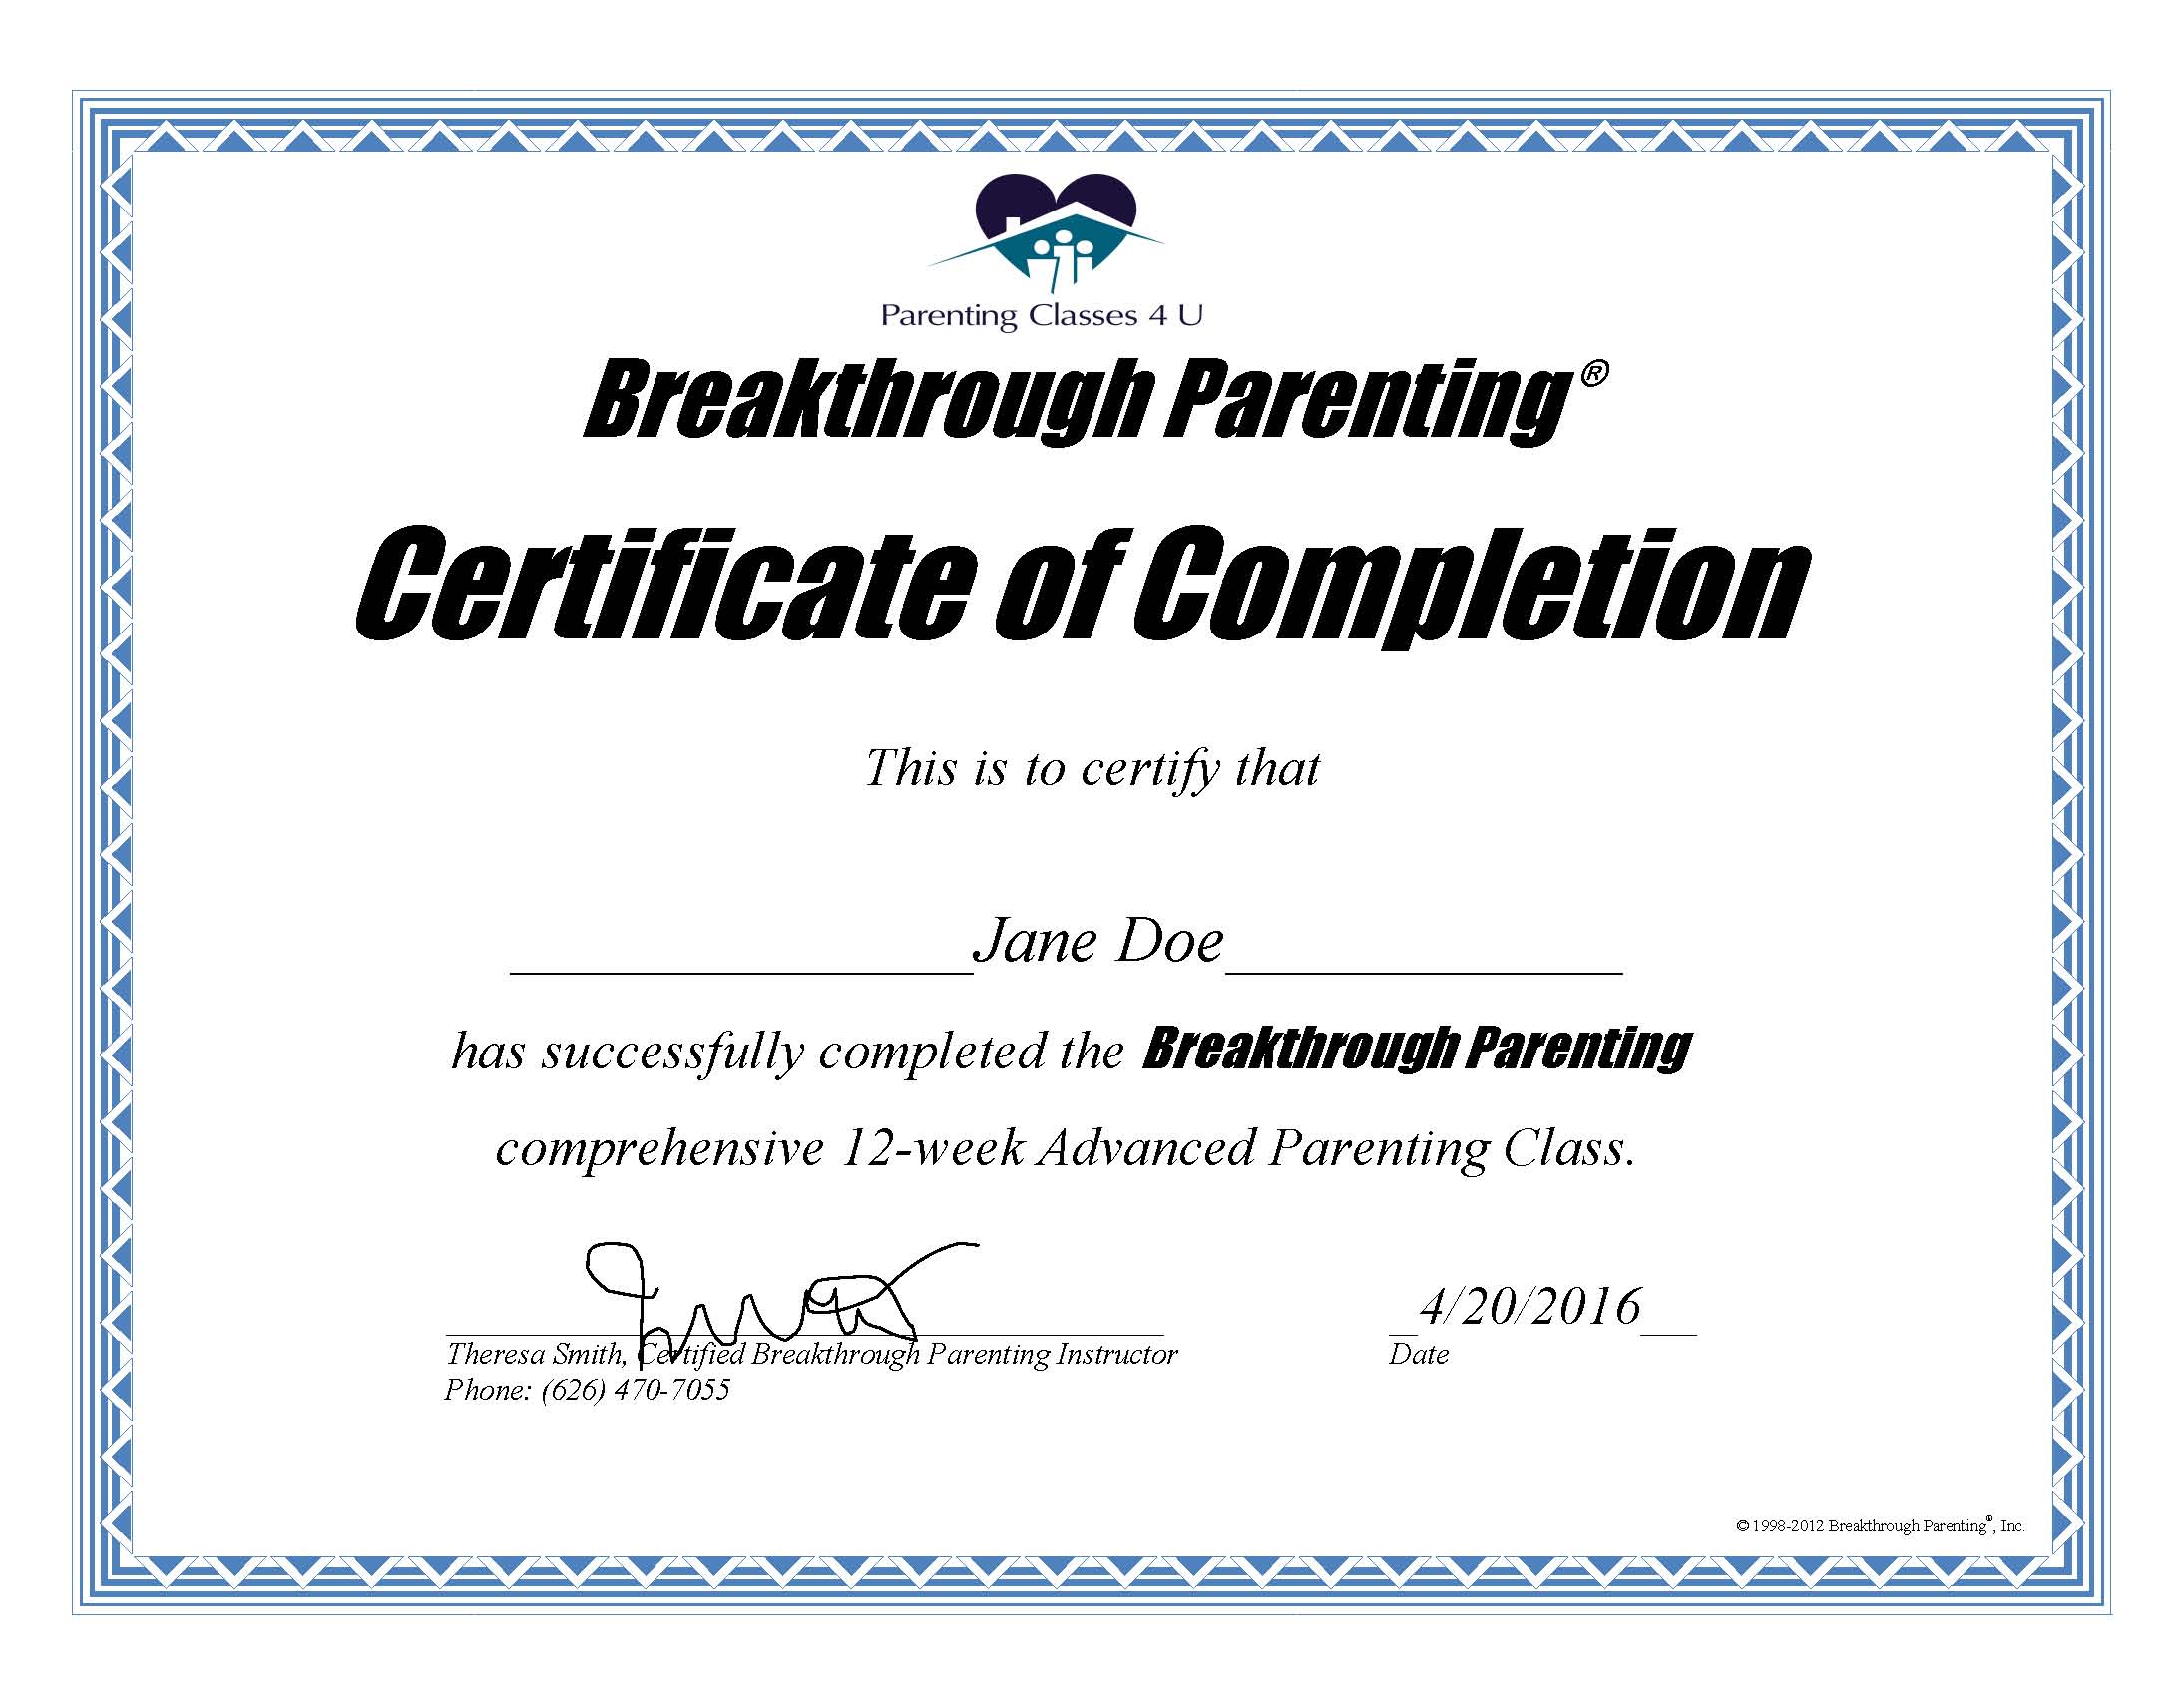 parenting class certificate of completion template, free parenting class certificate of completion, parenting class certificate printable, parenting certificate of completion templates, parenting class certificate template, free parent certificates templates, parenting certificate pdf